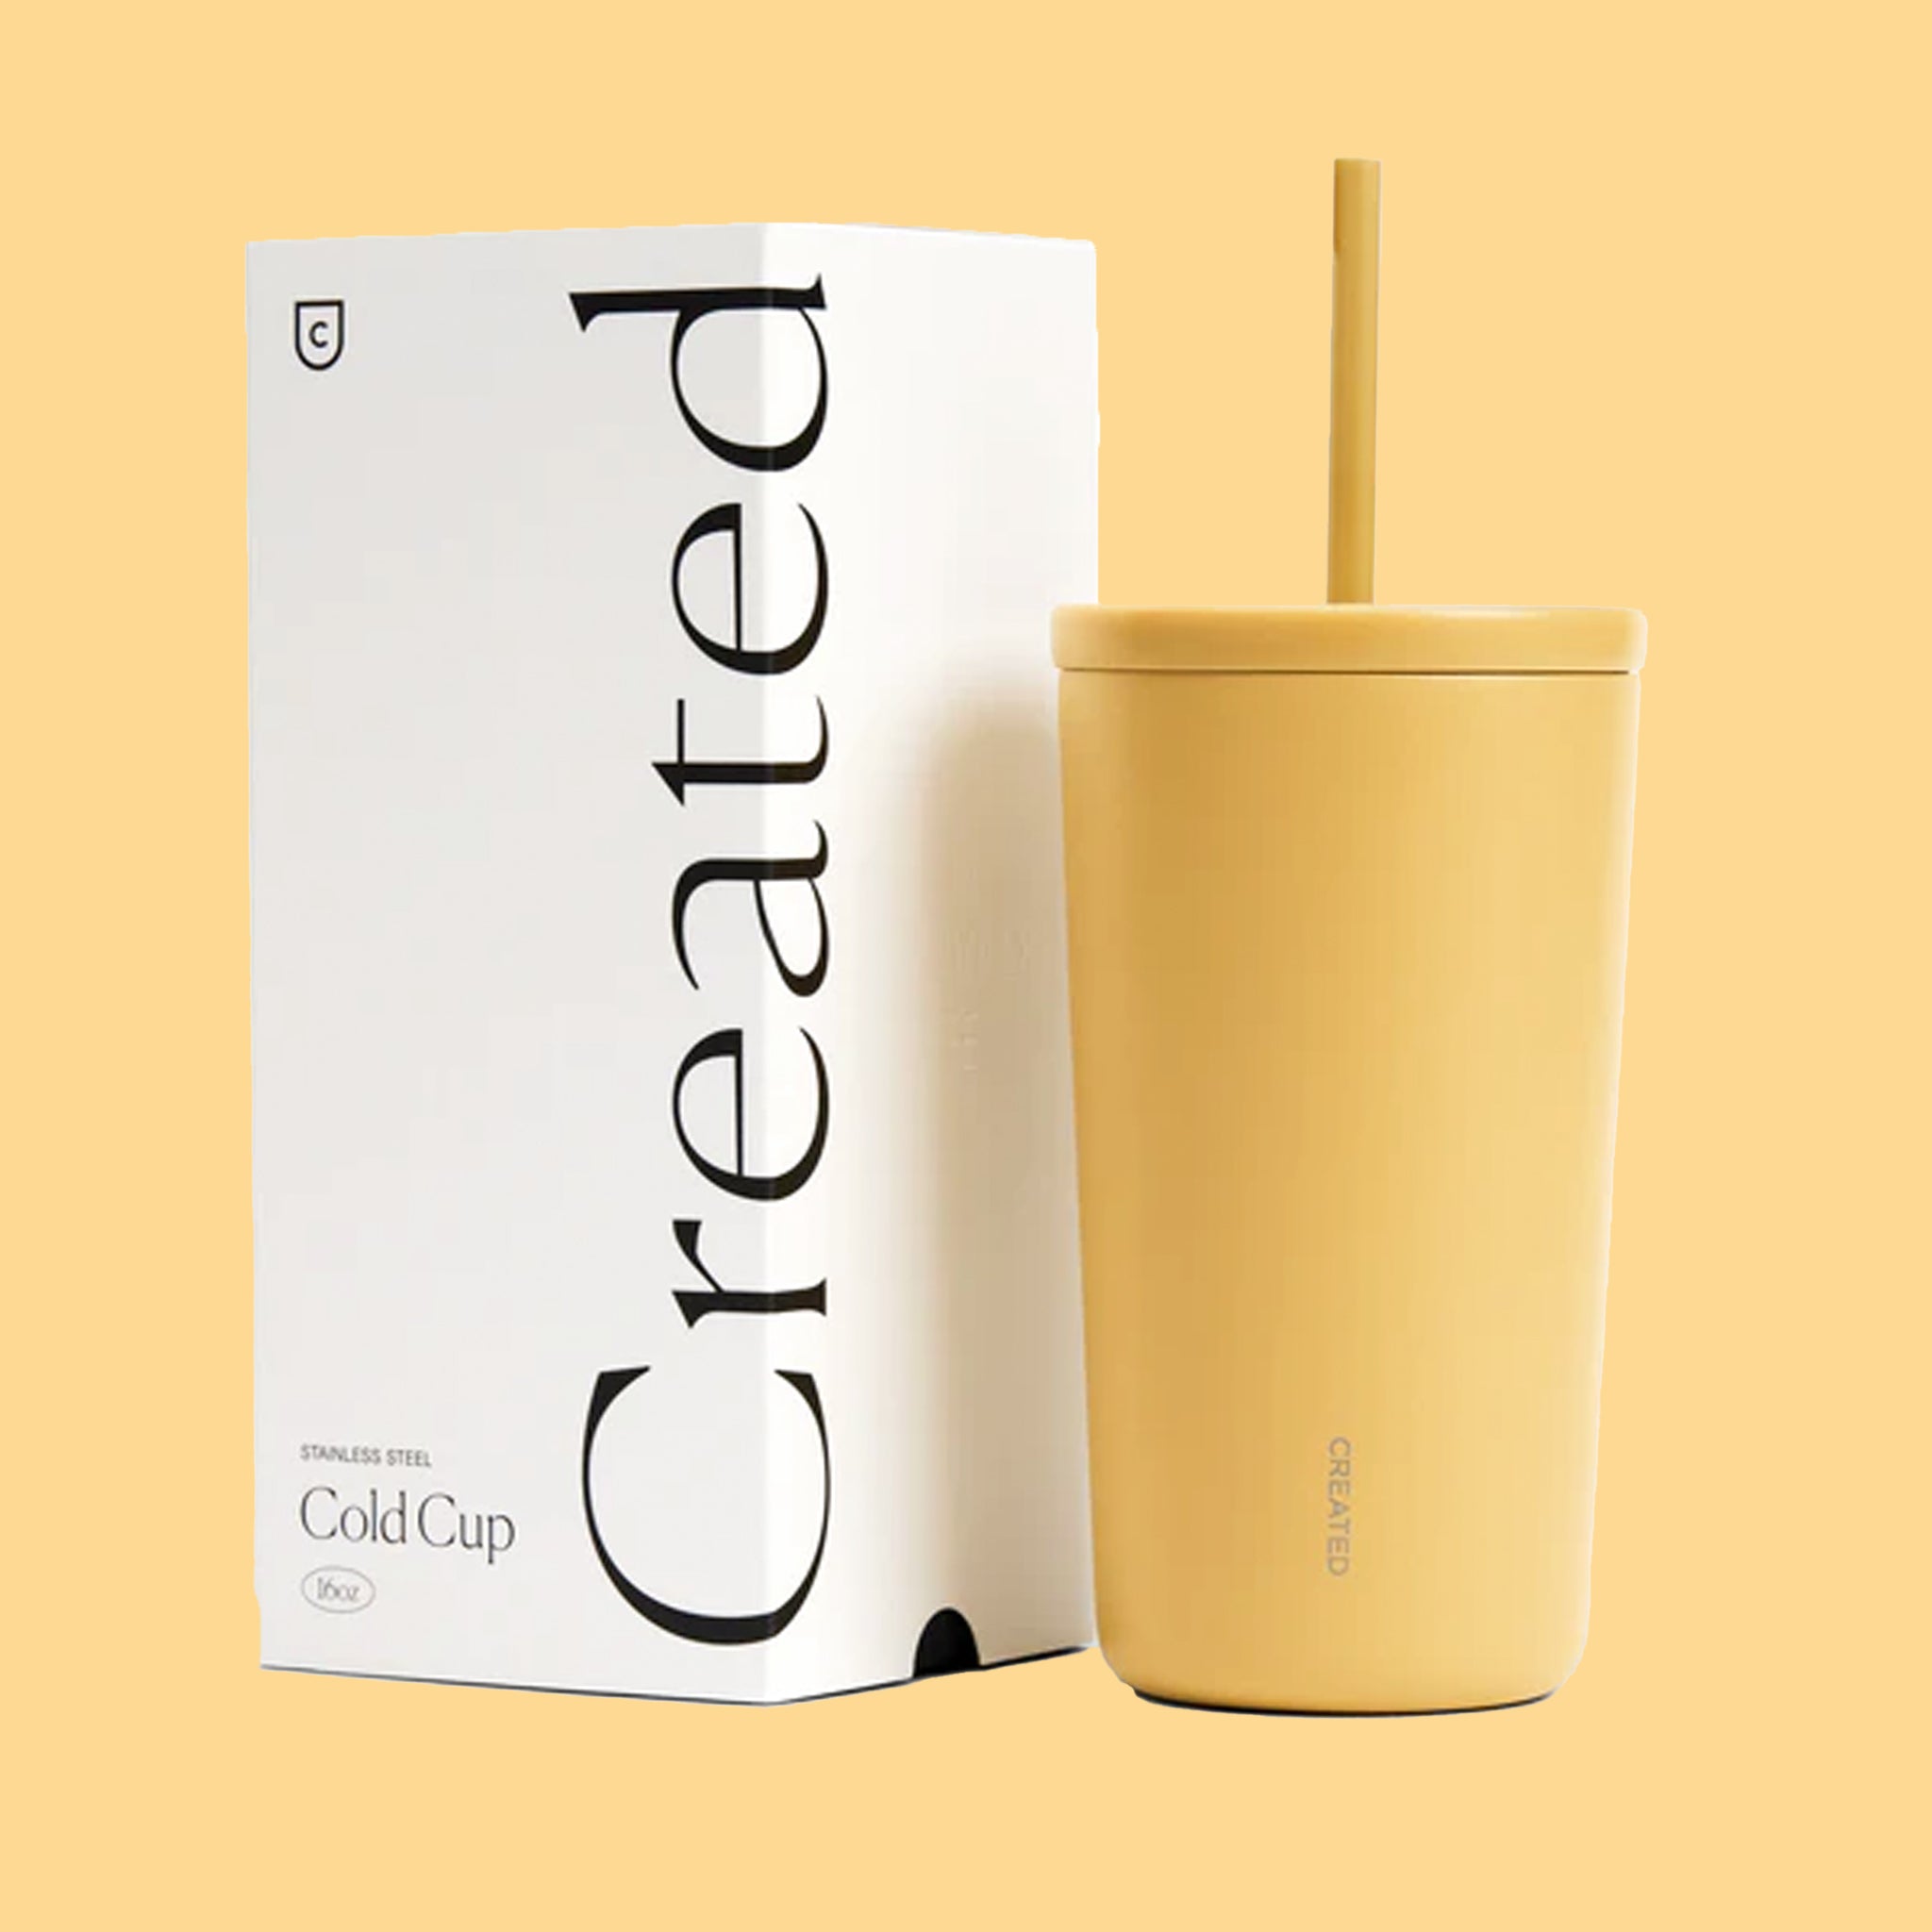 A yellow cold cup tumbler with a straw. 